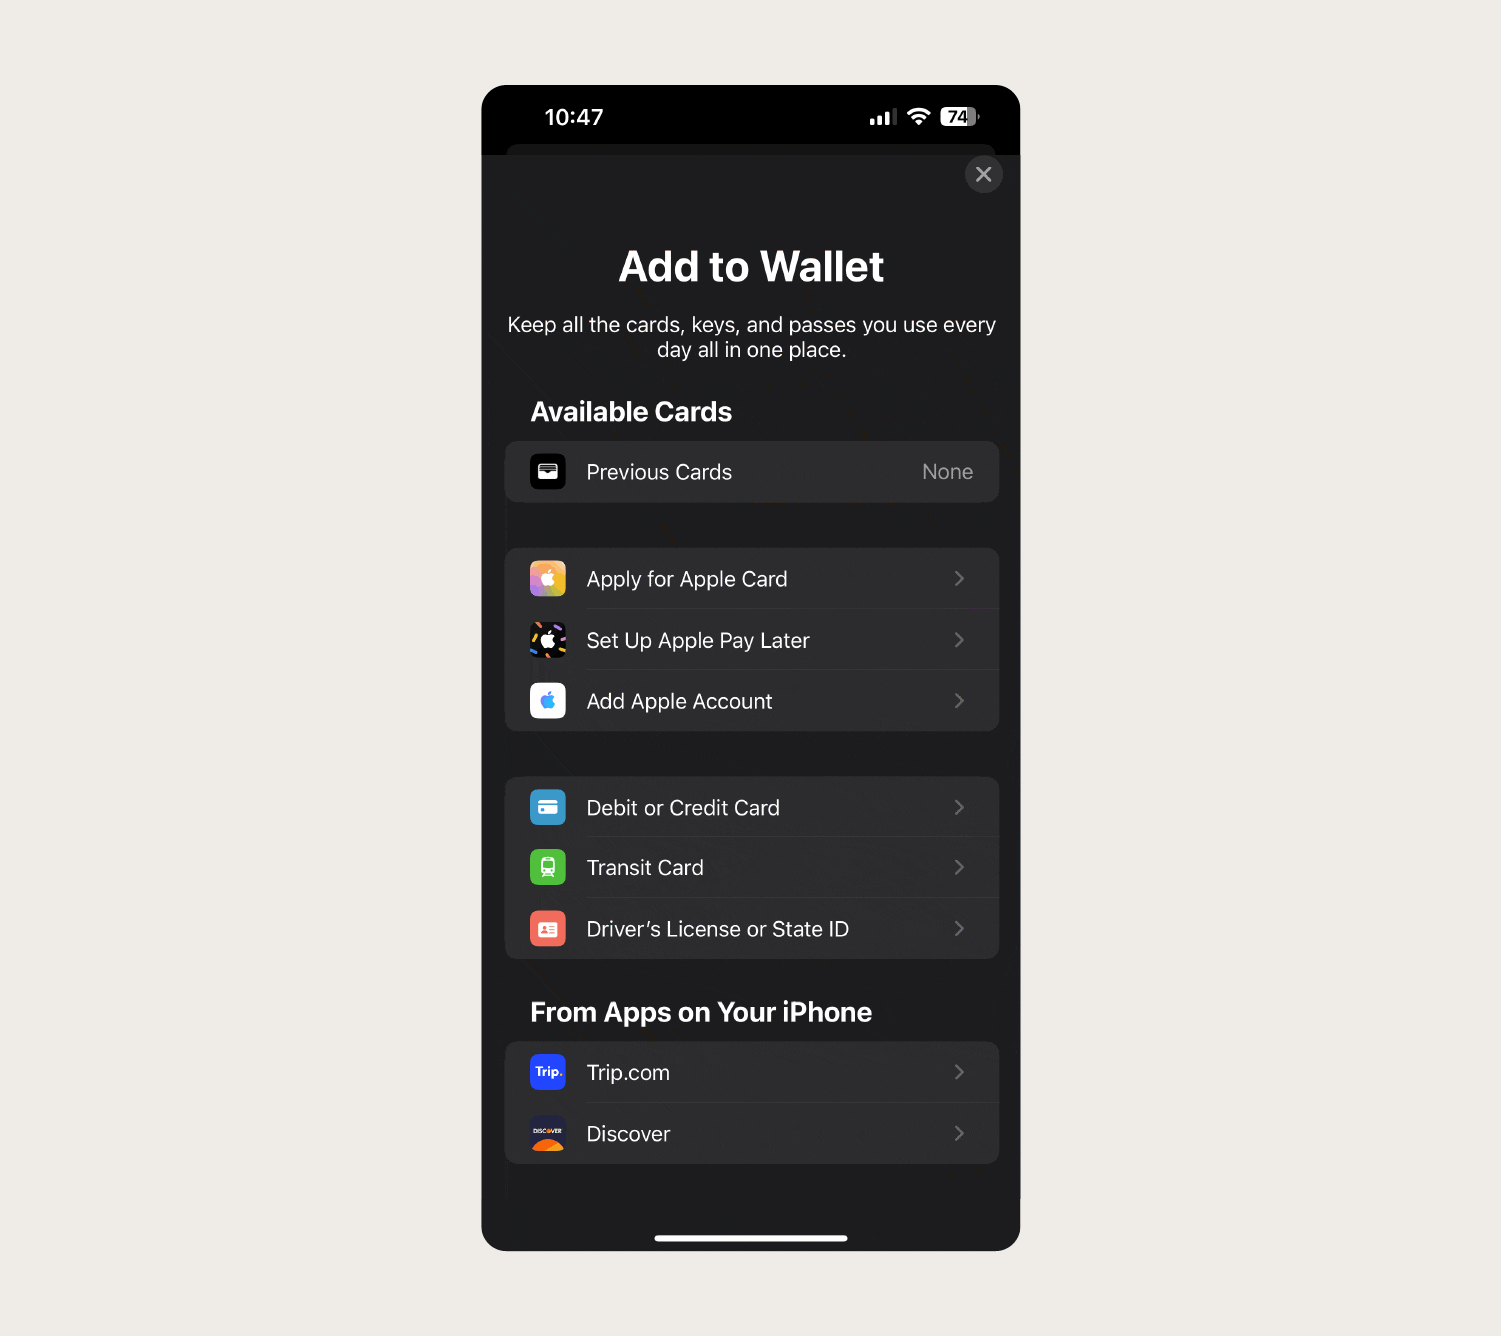 Steps showing how to add cards to Apple Wallet.